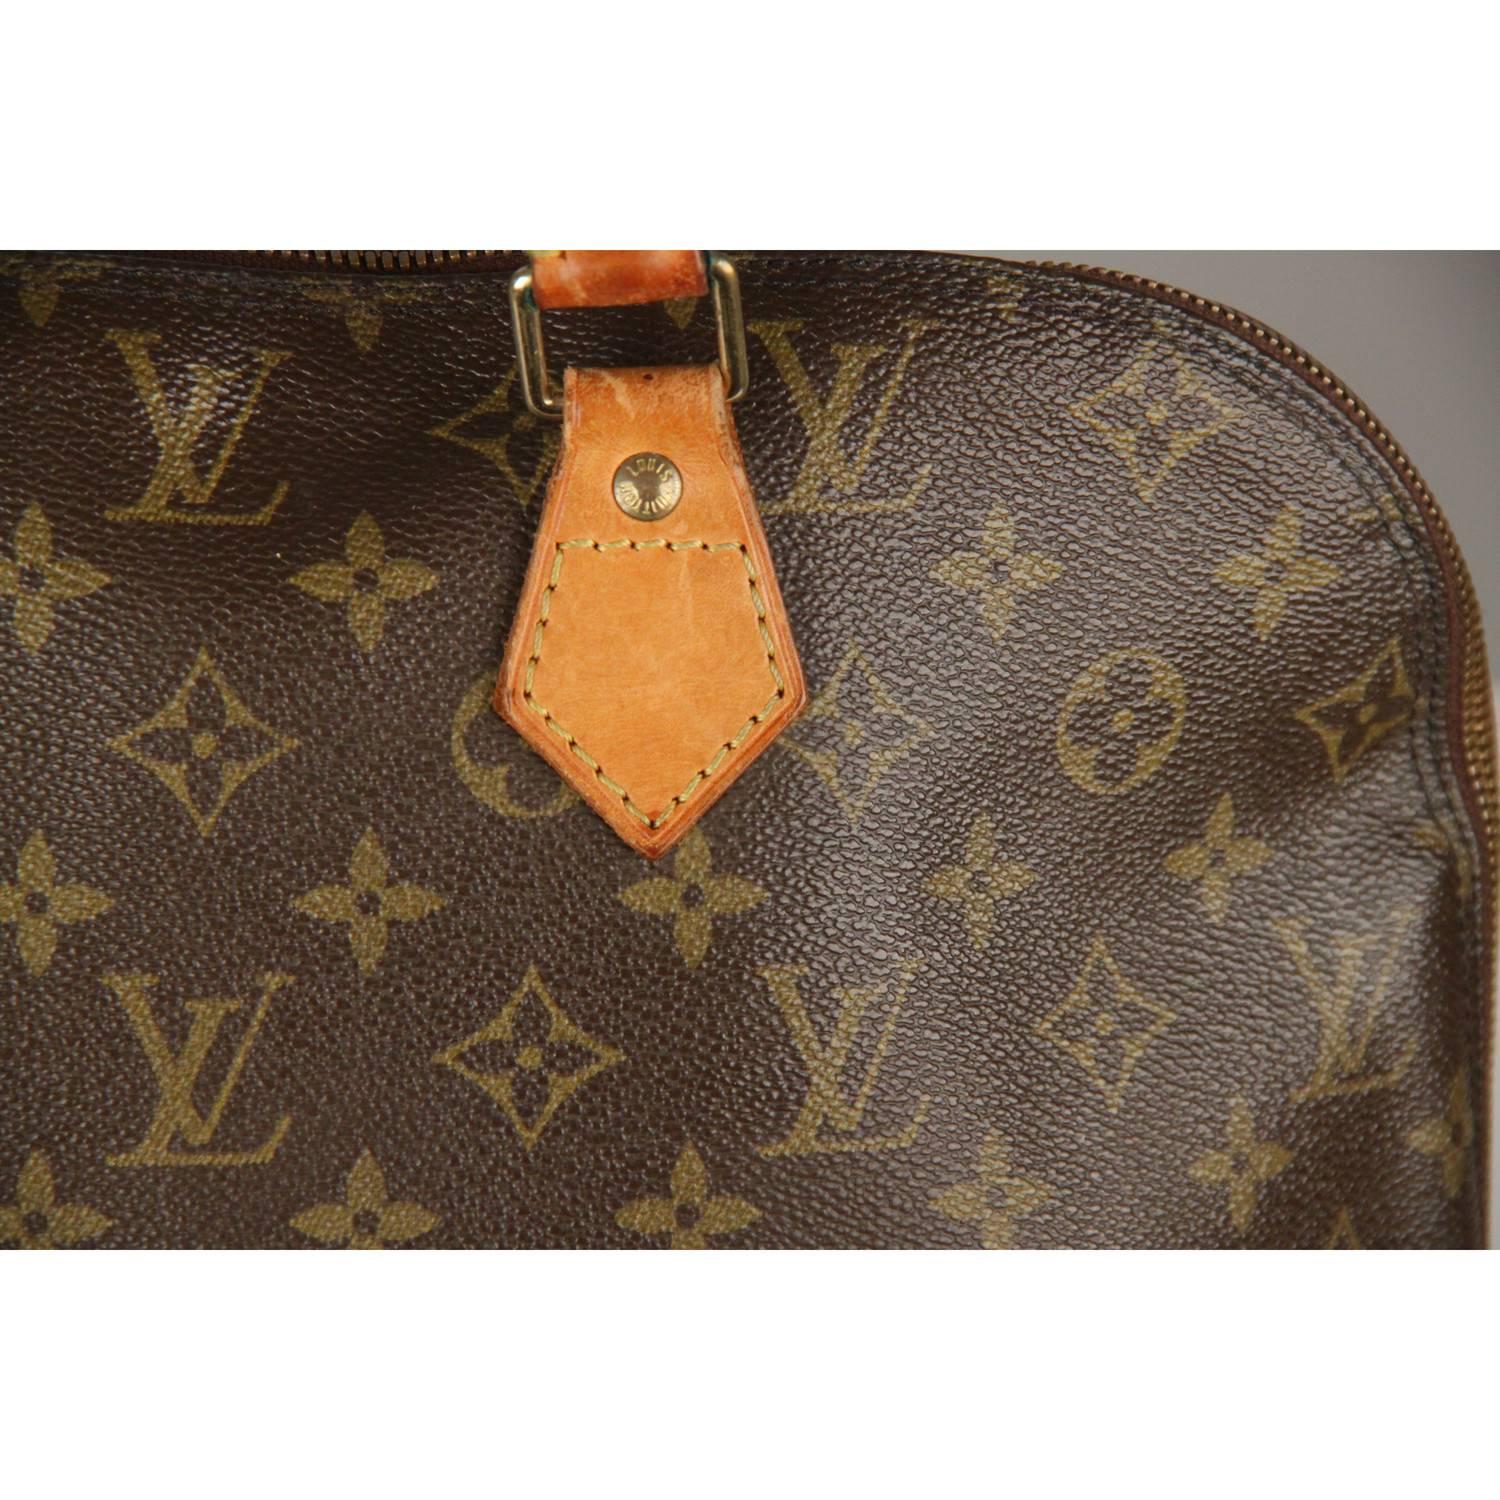 Inspired by the shape invented in the 30s by Gaston Vuitton, the ALMA by LOUIS VUITTON is a classic of the House. Double top handle carried, this bag is crafted in timeless monogram canvas. The inside is lined with brown canvas lining and it has 1